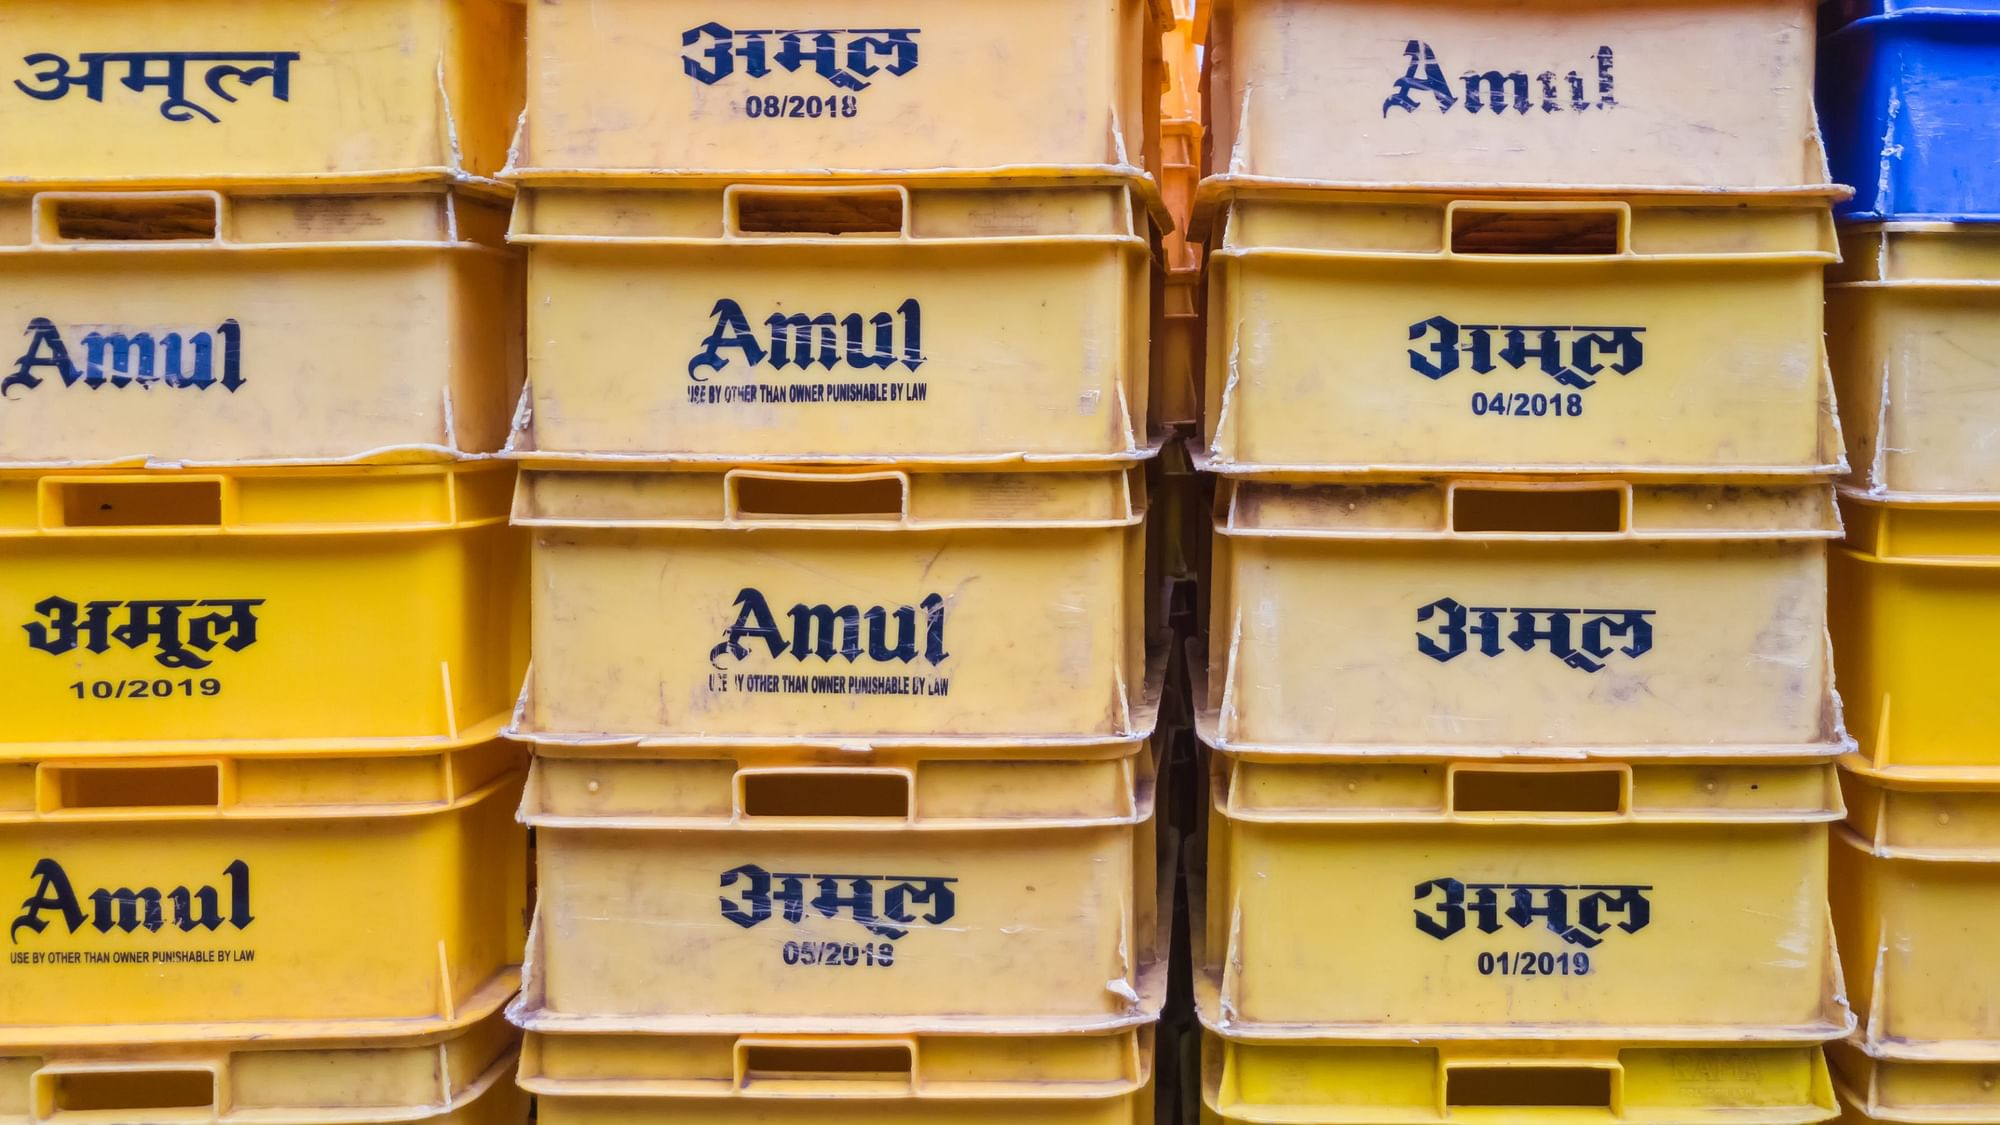 Not Utterly, Butterly Delicious: What Is the Amul vs Aavin Controversy?